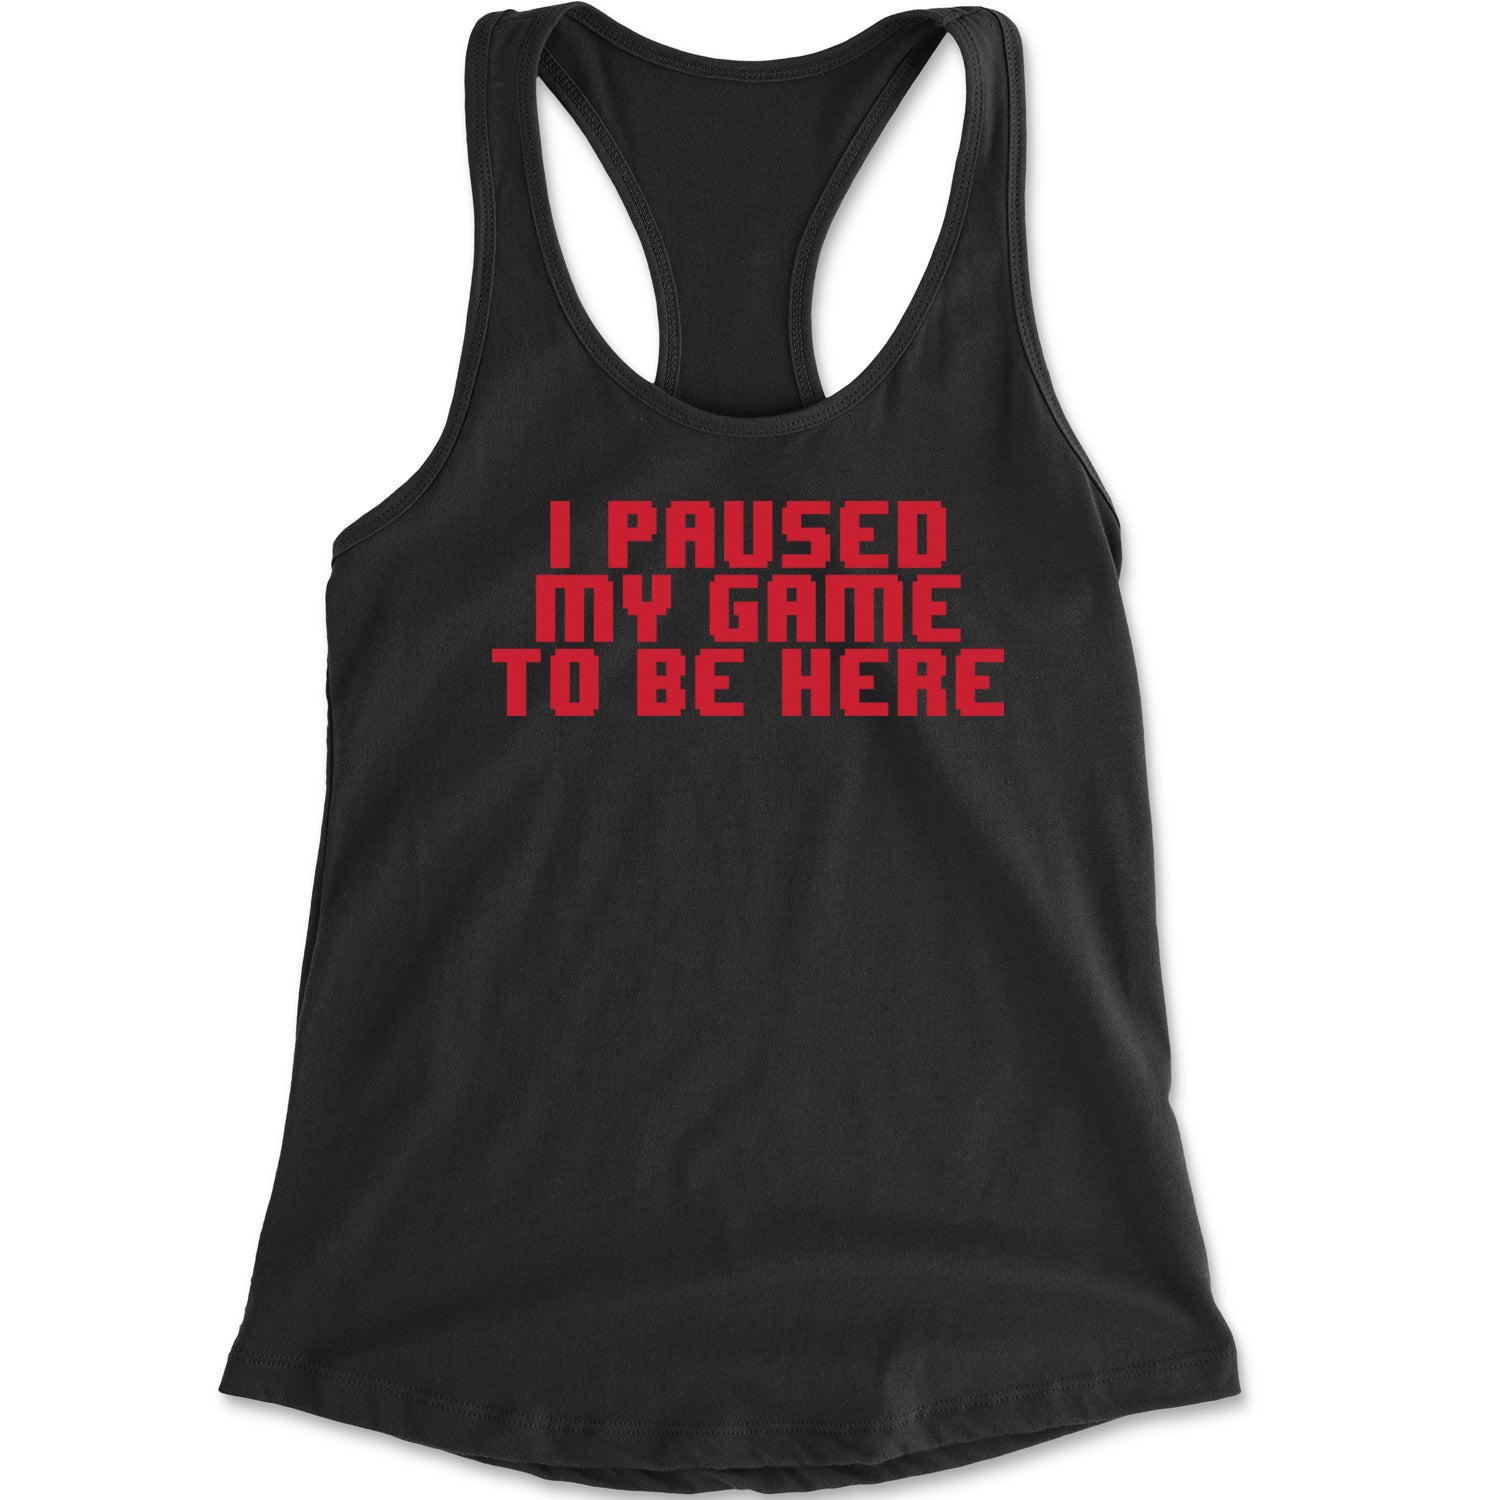 I Paused My Game To Be Here Funny Video Gamer Racerback Tank Top for Women